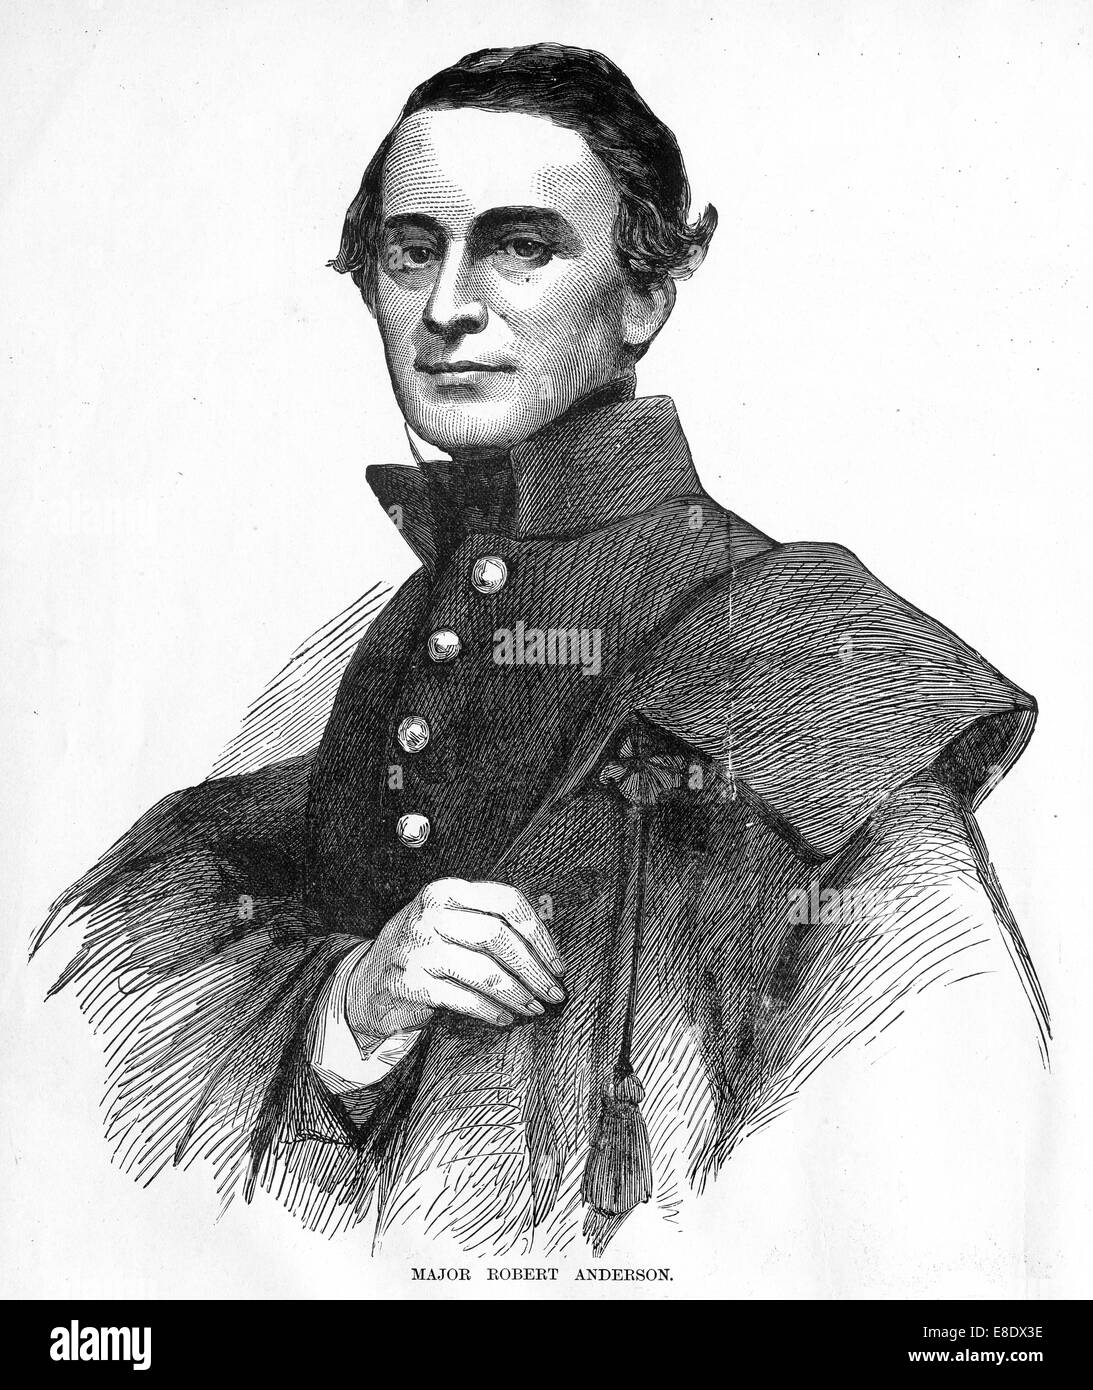 Engraving of Major Robert Anderson from 'Famous Leaders and Battle Scenes of the Civil War,' Published in 1864. Stock Photo